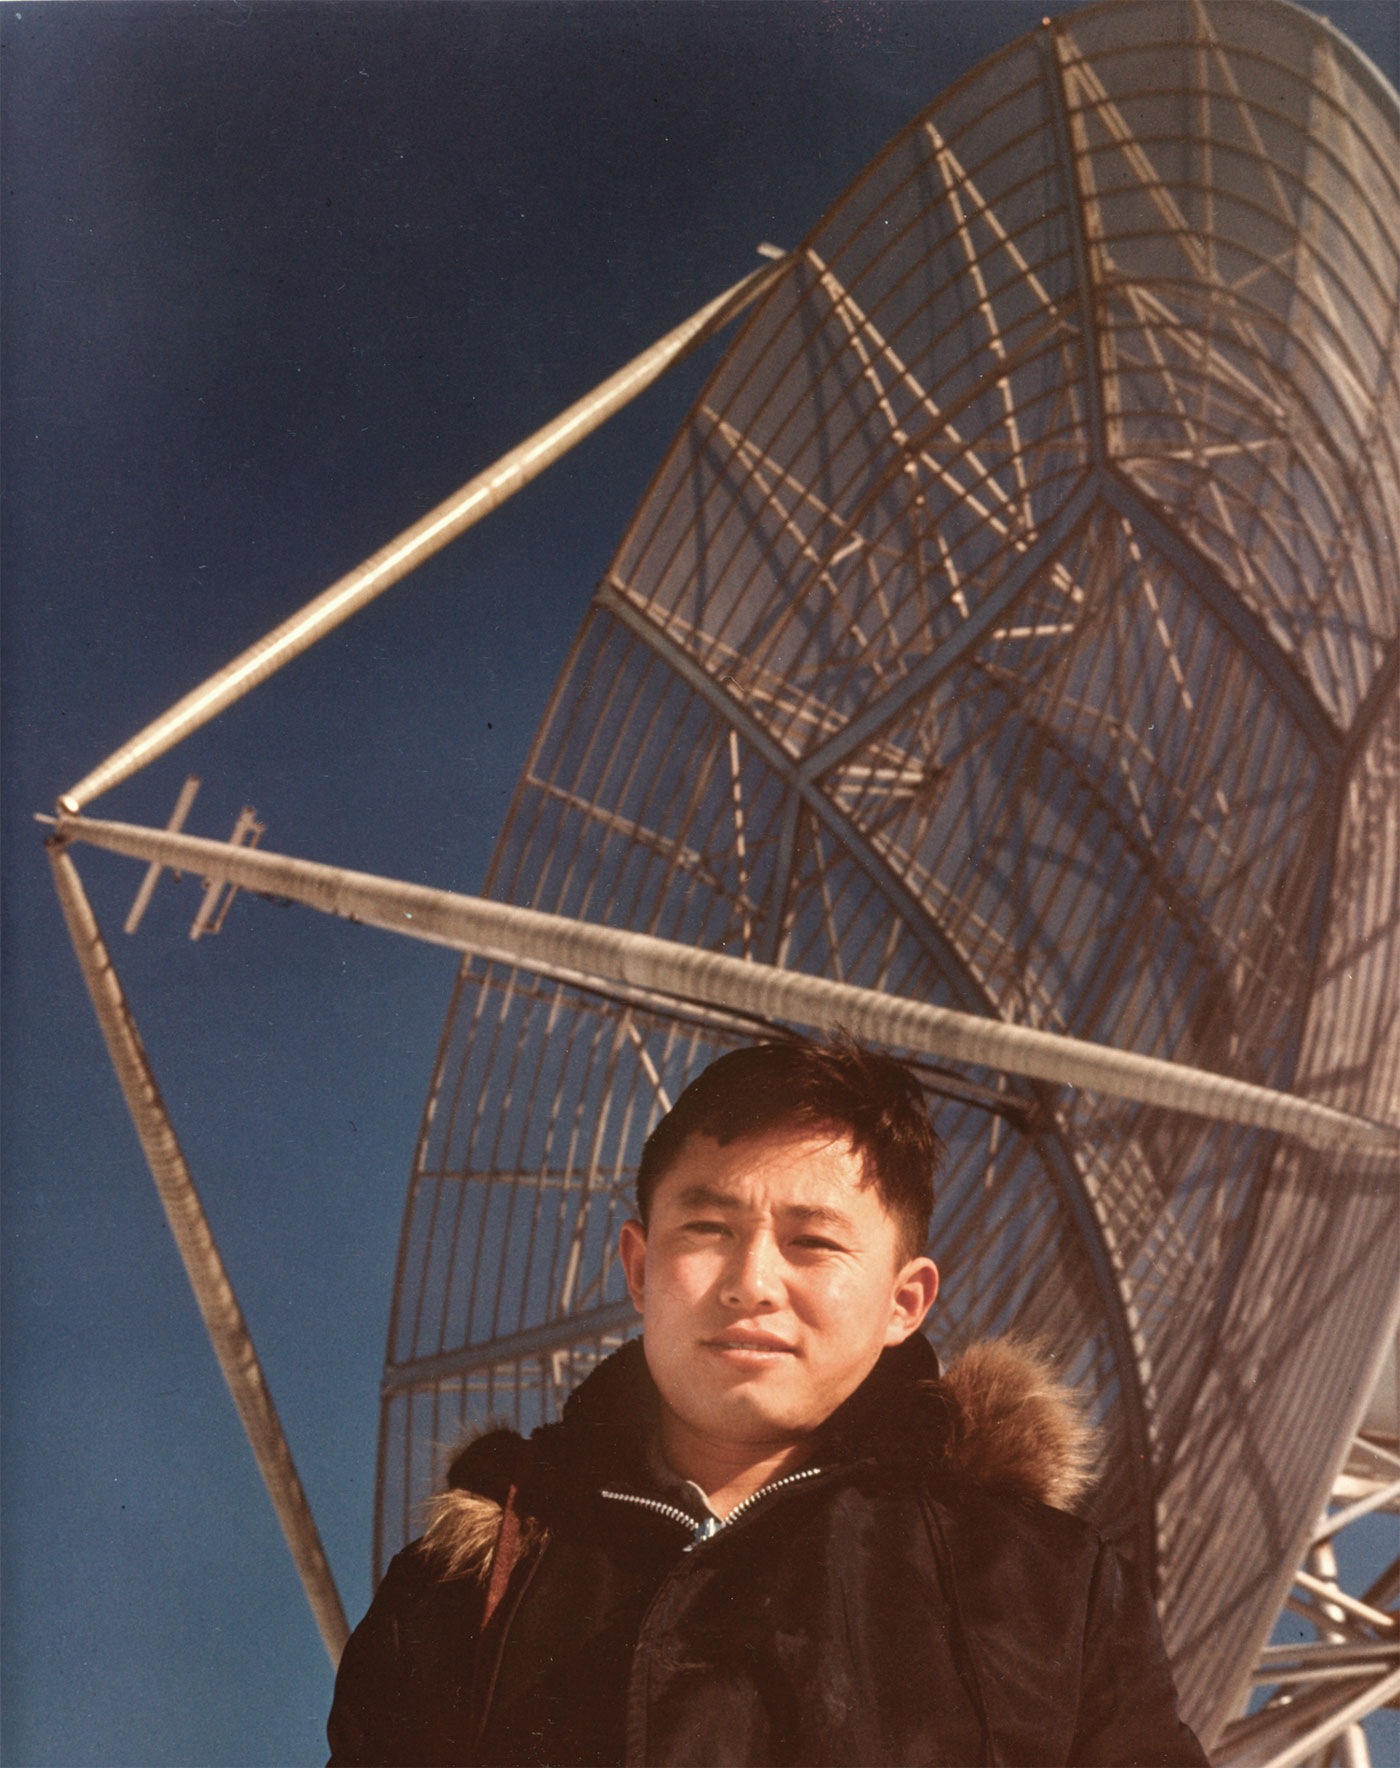 In 1959, Syun Akasofu stands by an antenna near where the International Arctic Research Center sits today. The antenna was the only structure on West Ridge at the time. Photo by Chuck Deehr.